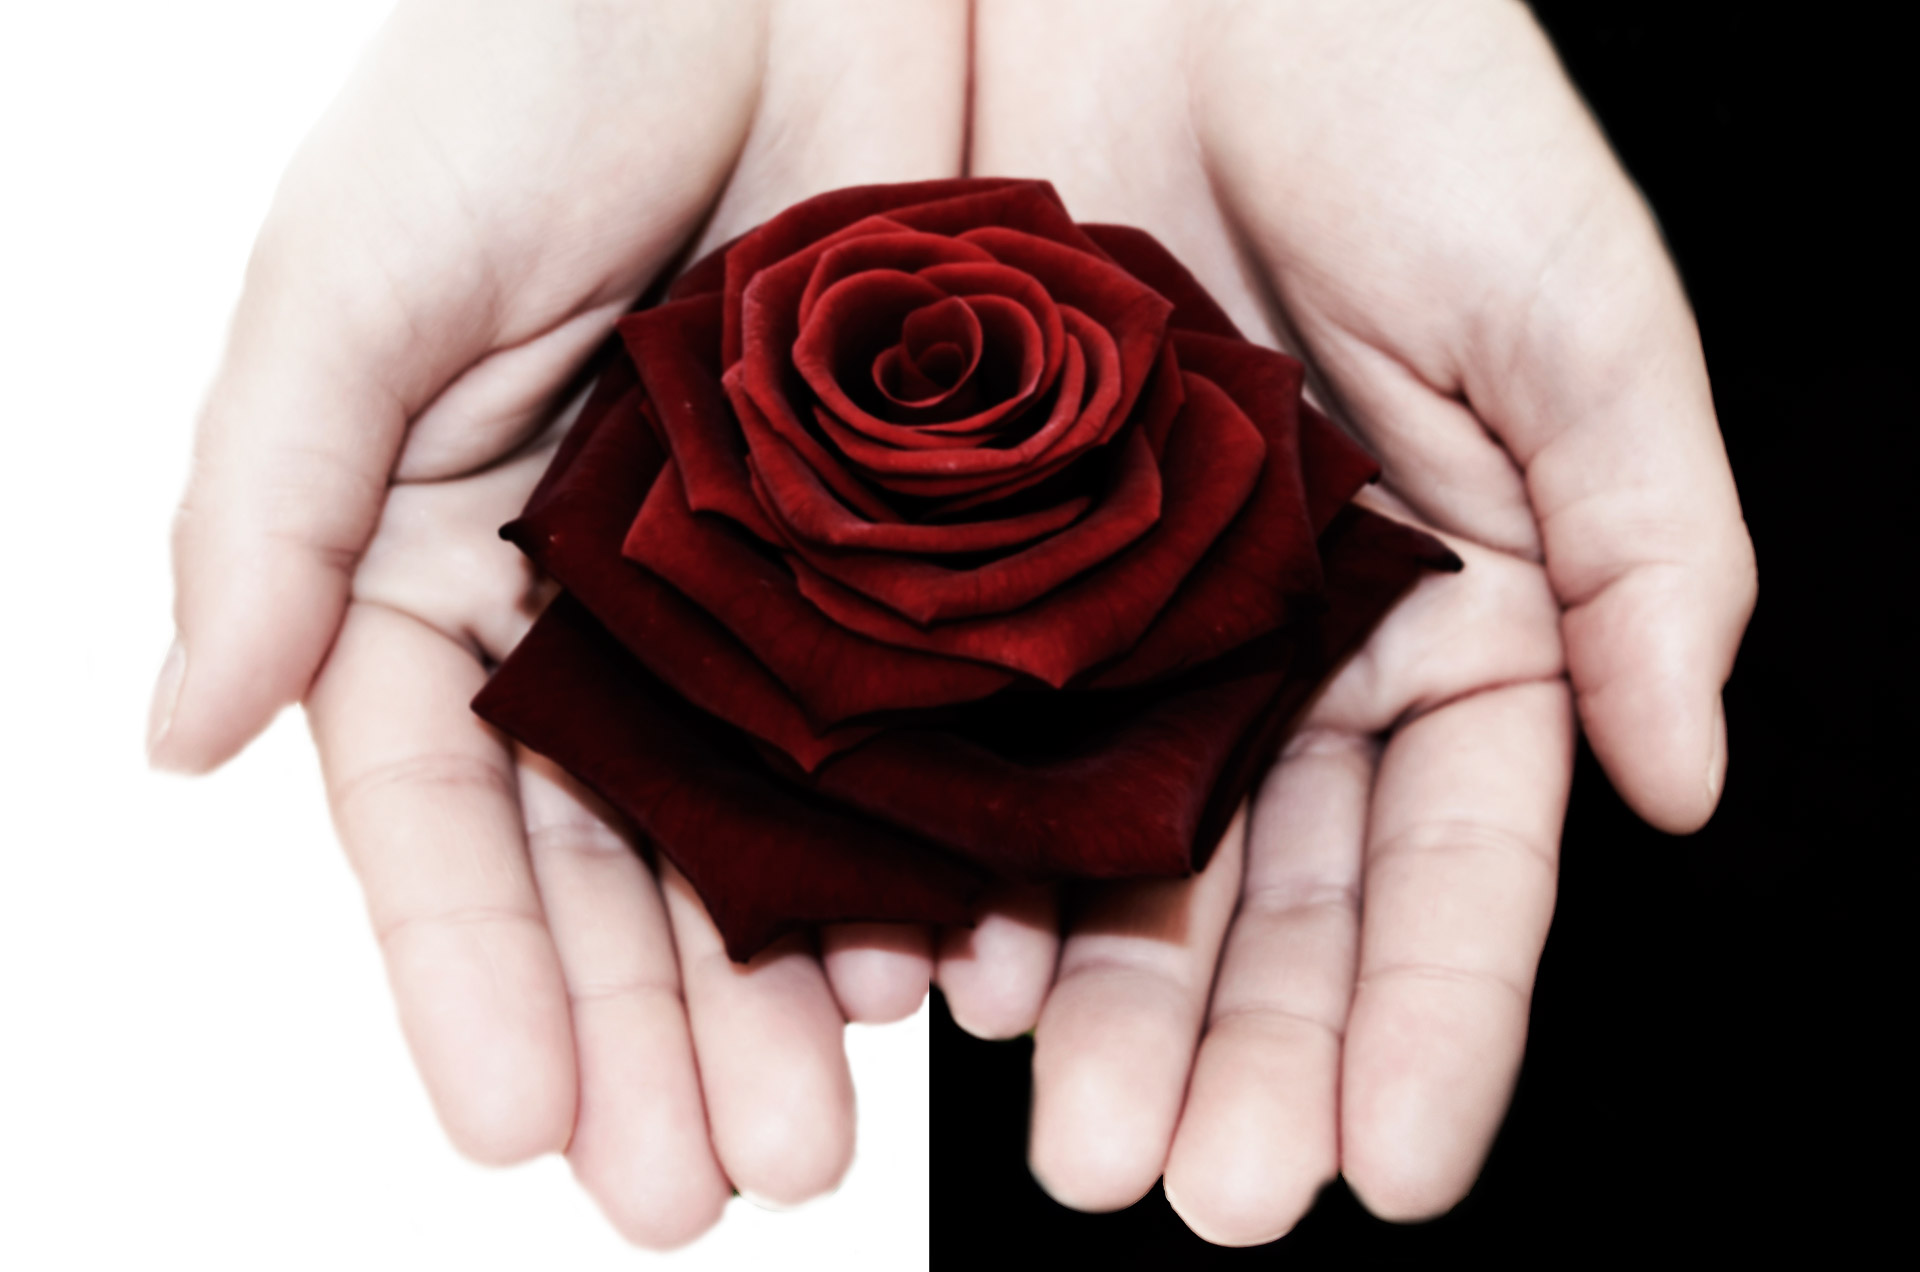 Red Rose - Background